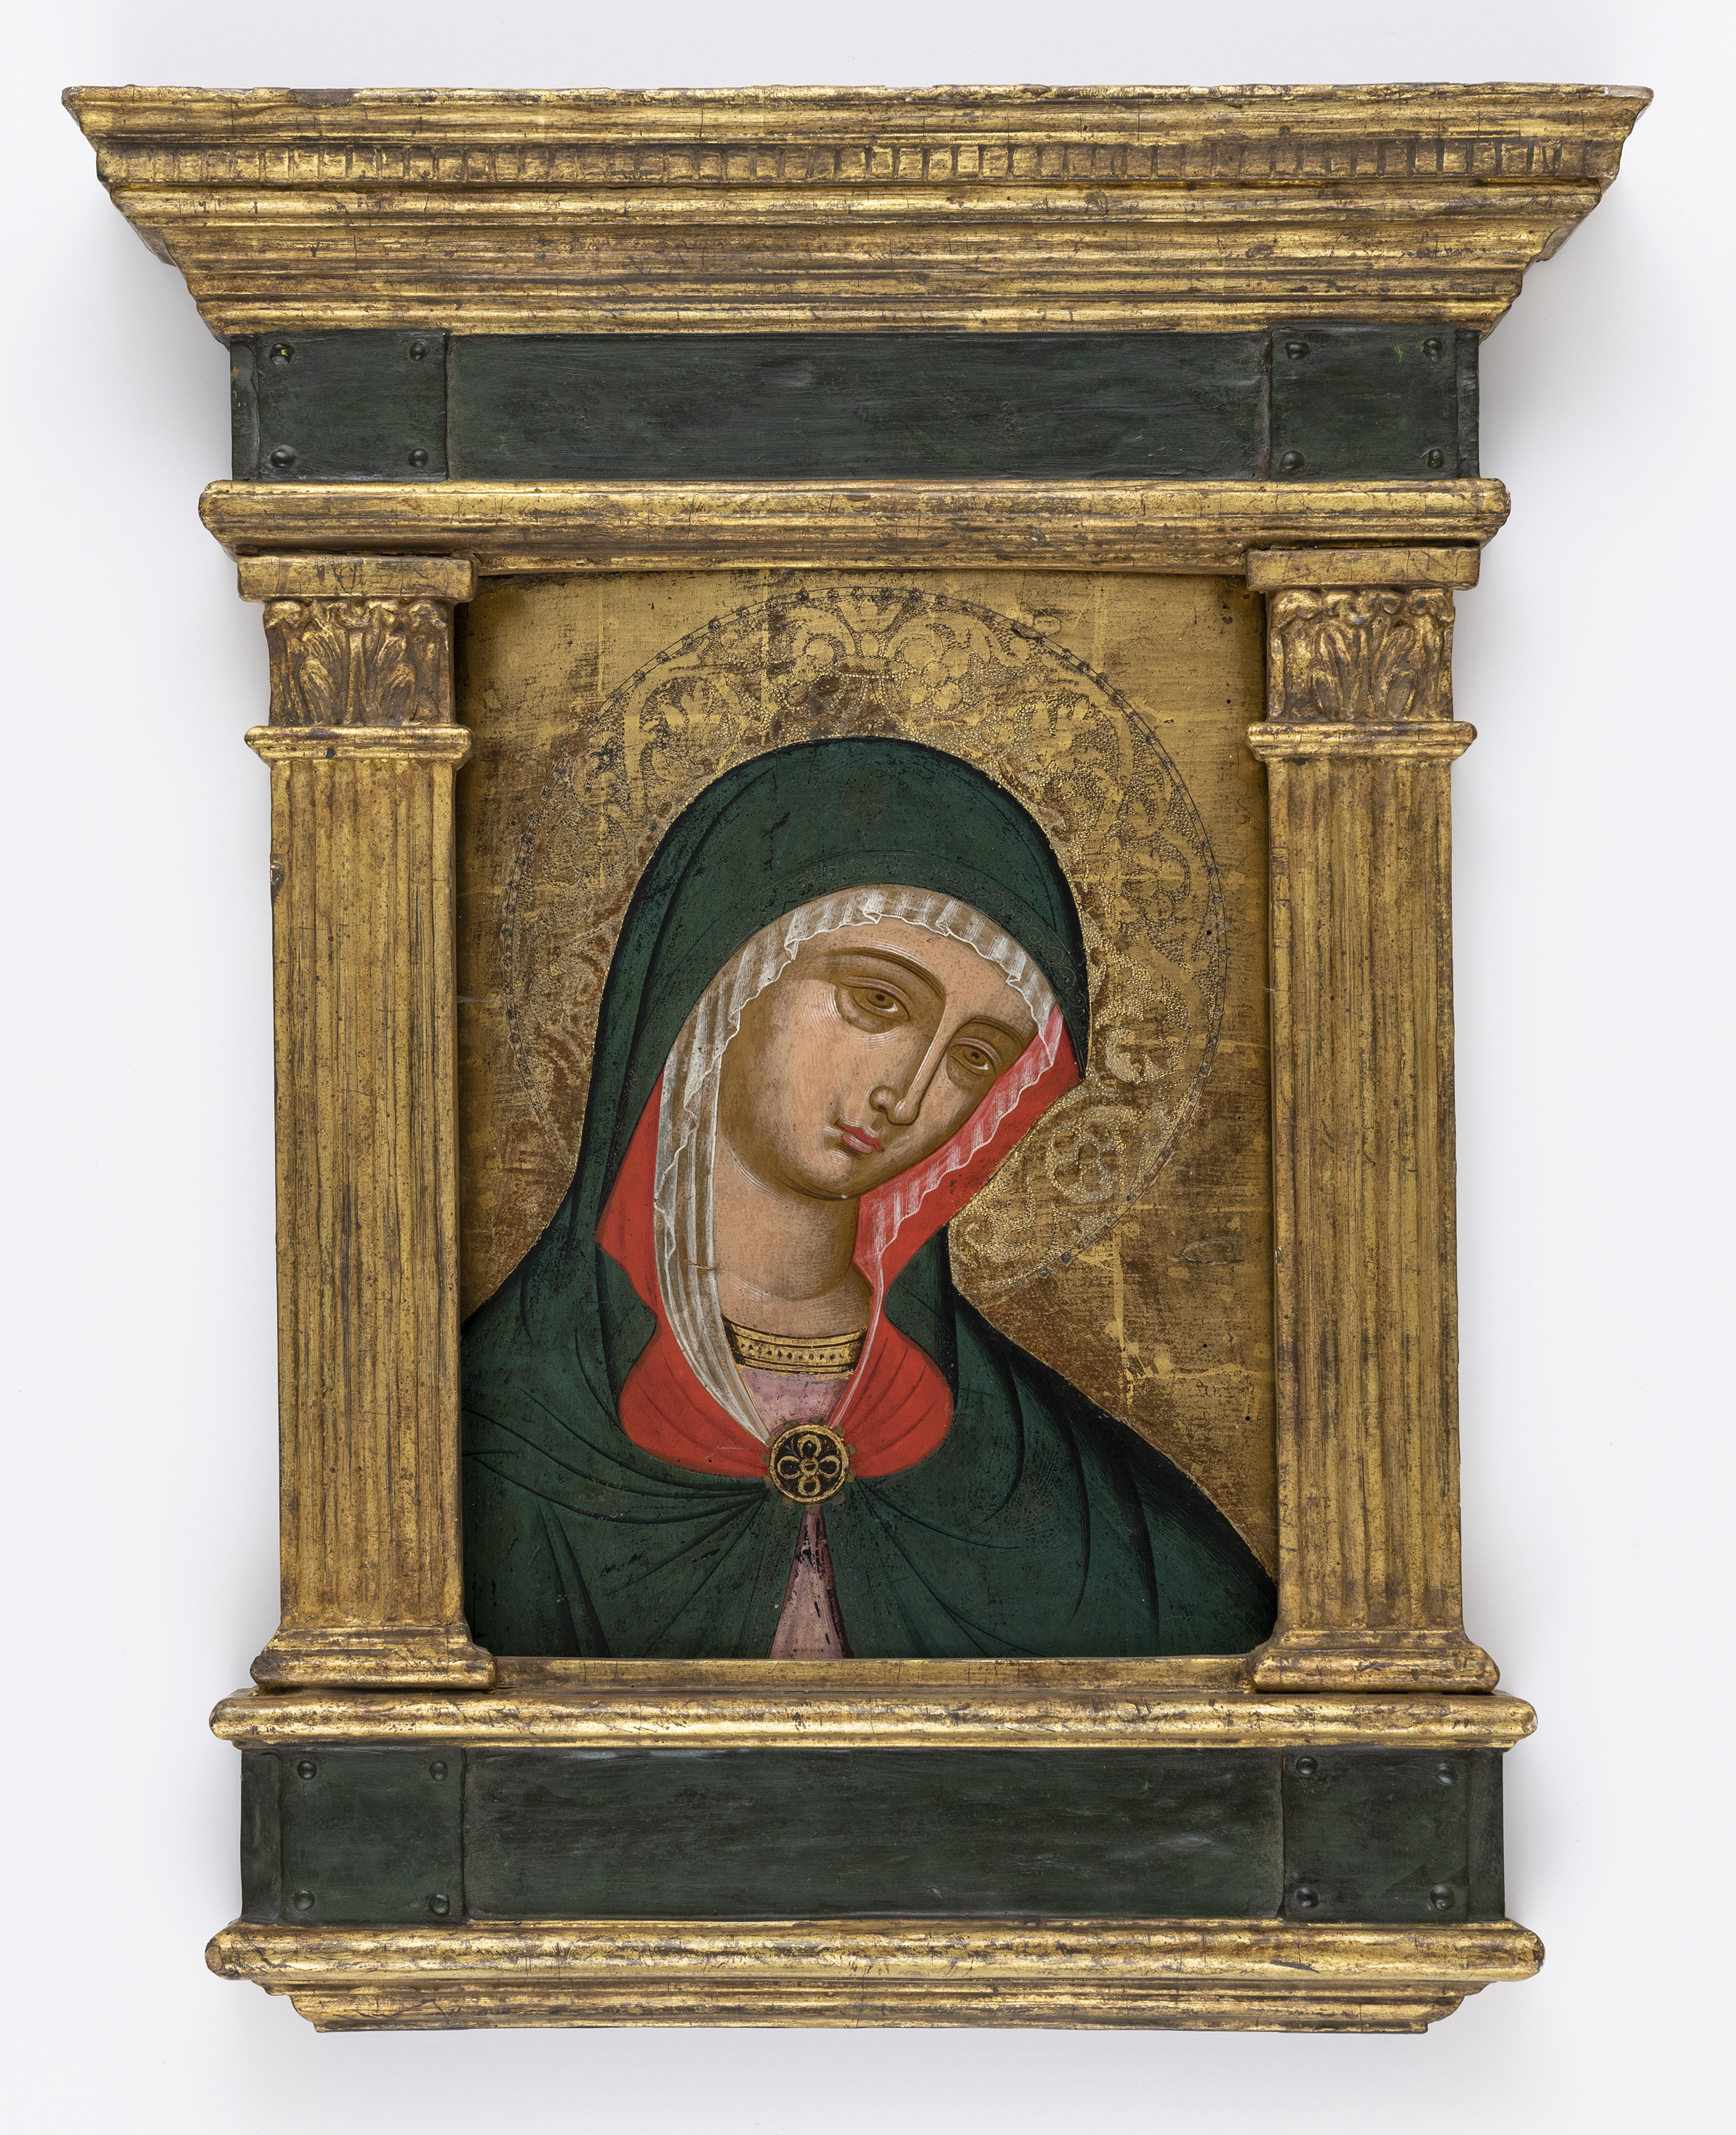 <p>Workshop of Constantine Tzanes (1633&ndash;1685)<br />
Head of the Virgin, 17th century<br />
Crete<br />
egg tempera, gold leaf and gesso on wood<br />
660 x 550 mm<br />
on loan from a private collection, Canberra</p>